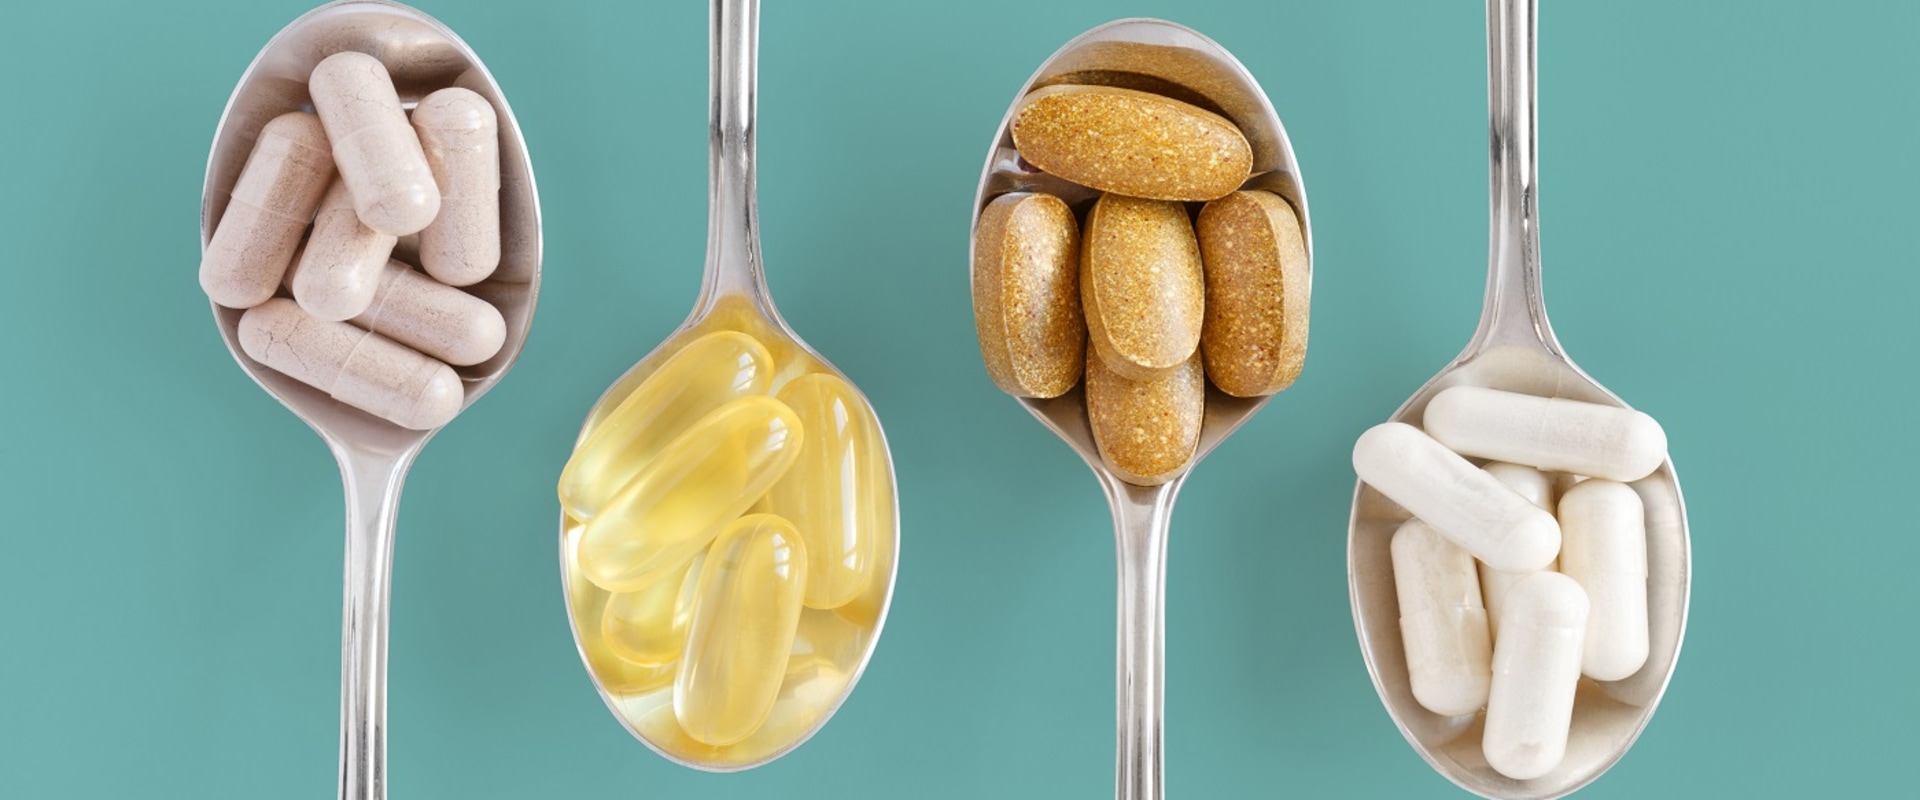 What supplements are ok to take together?